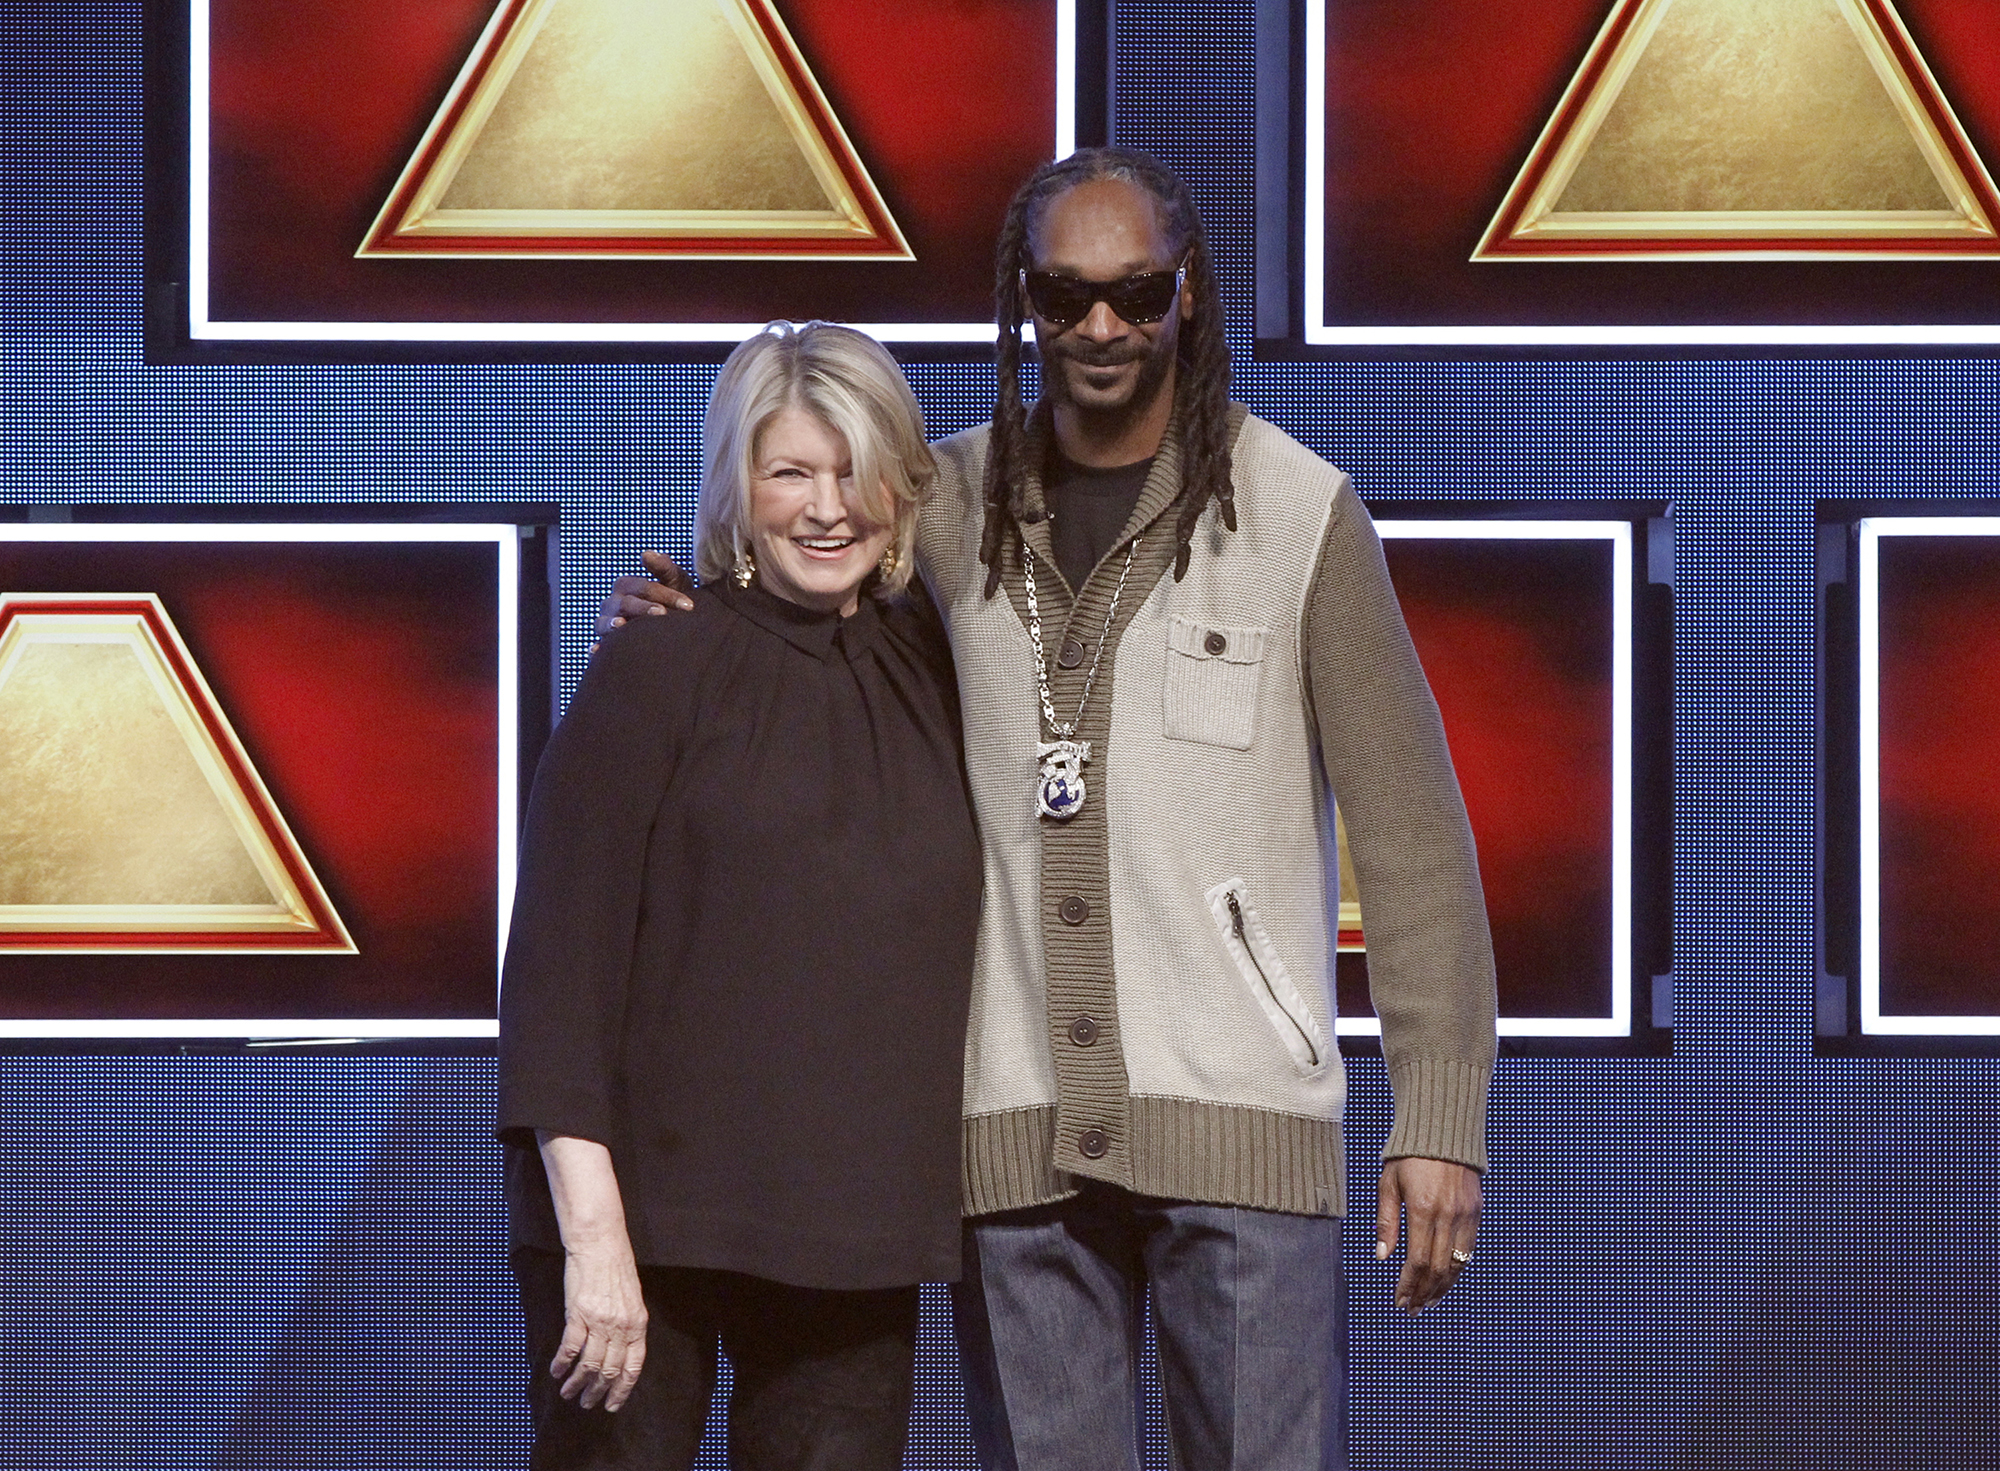 Martha Stewart and Snoop Dogg appear on ABC's "$100,000 Pyramid."  (ABC/ Lou Rocco)  MARTHA STEWART, SNOOP DOGG (Lou Rocco&mdash;ABC via Getty Images)